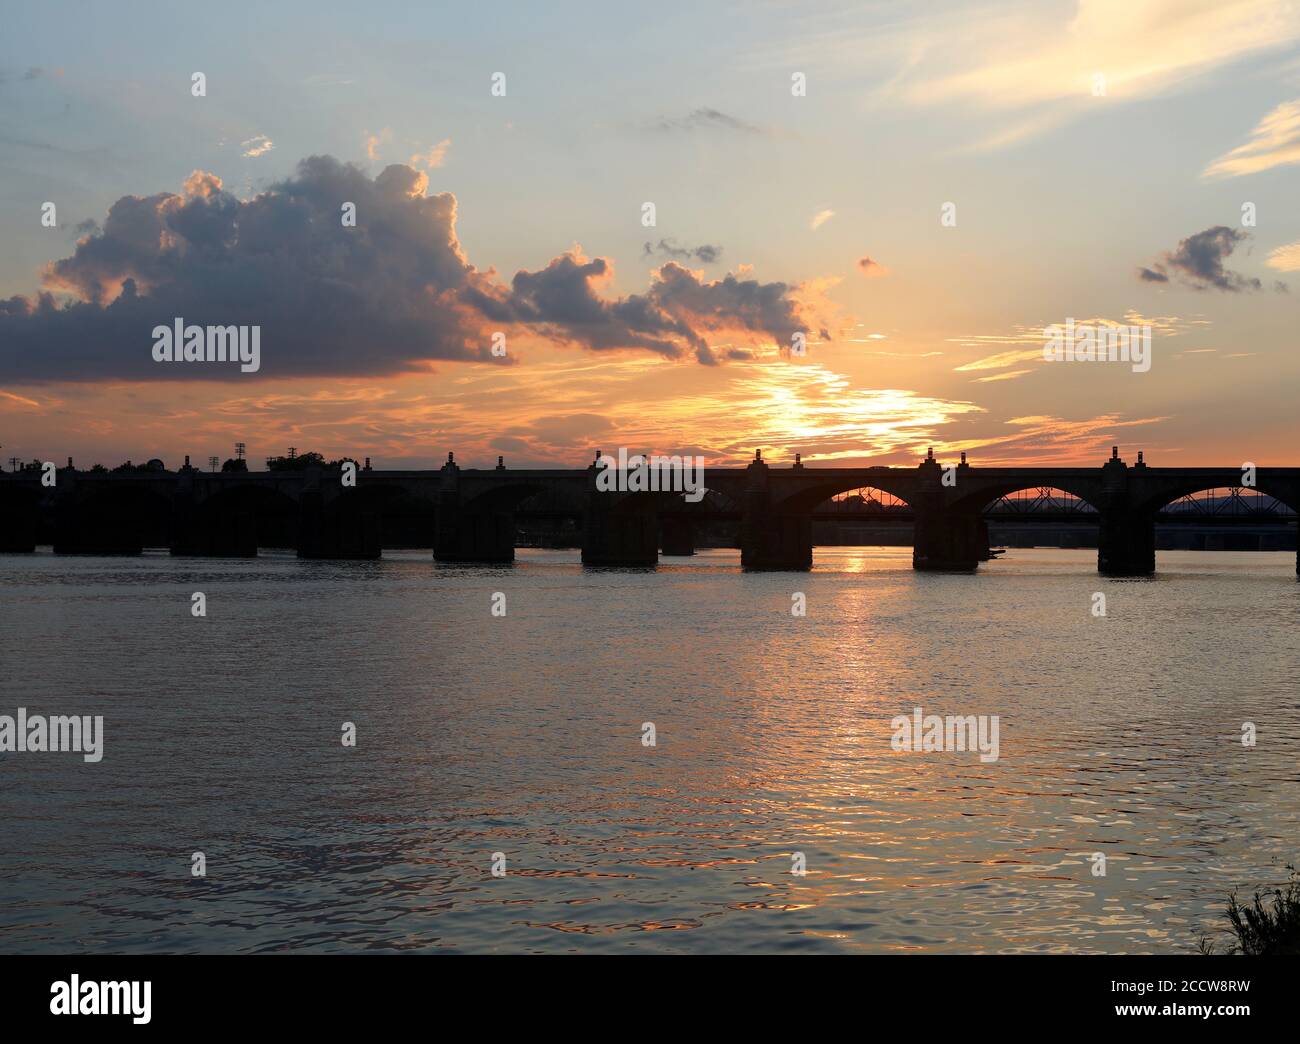 Sunset over Susquehanna river in PA Stock Photo